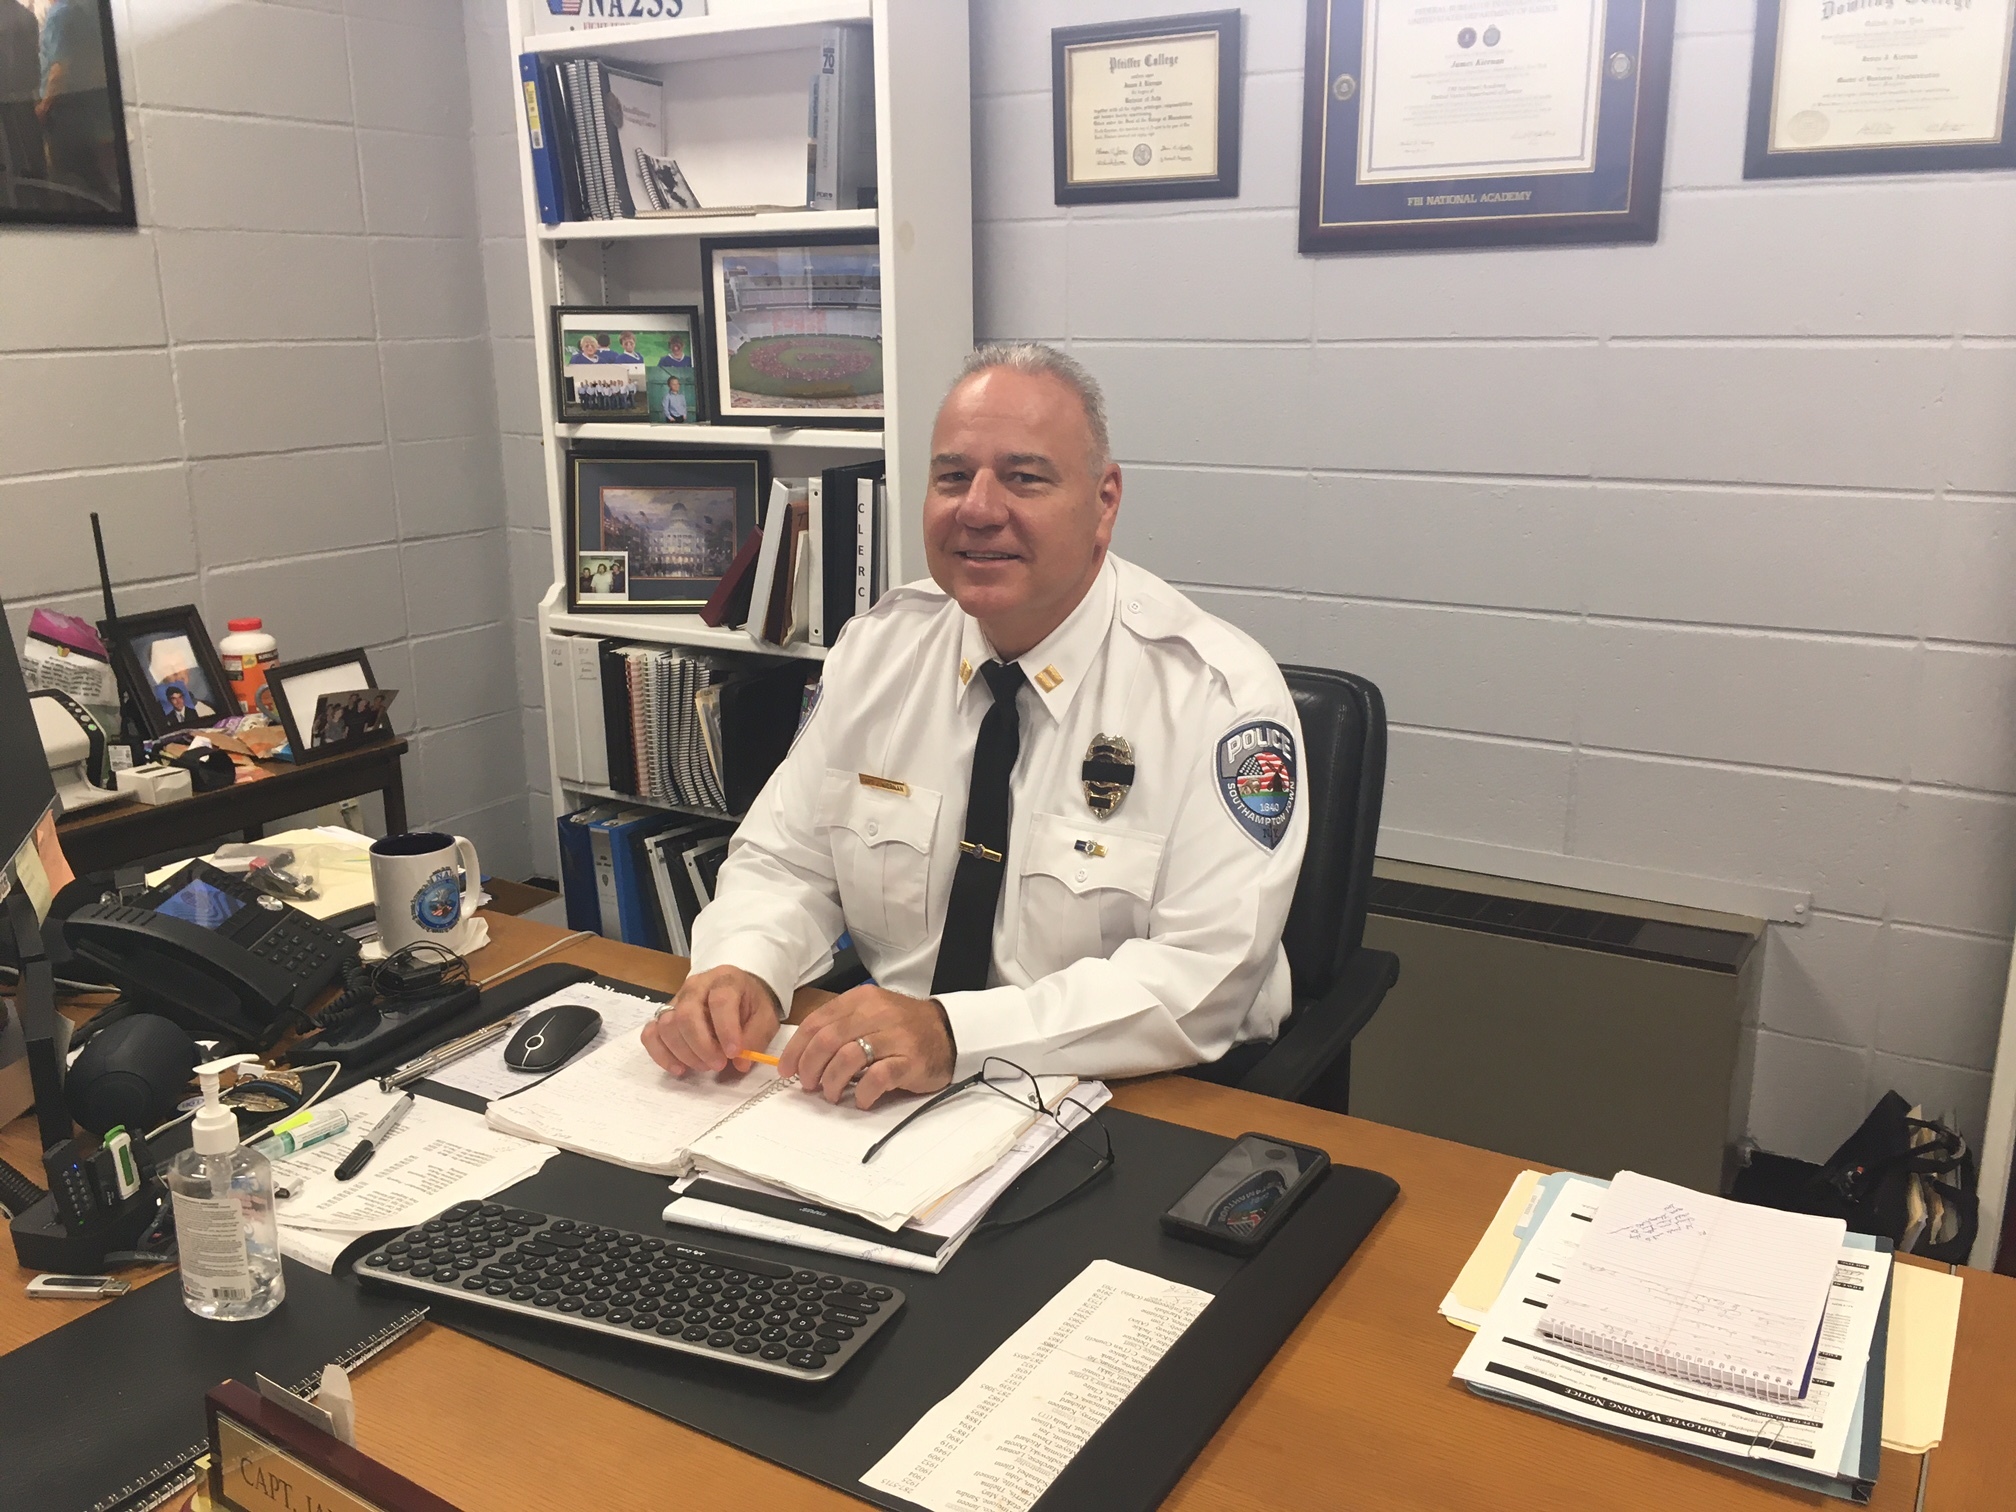 James Kiernan has been named Chief of the Southampton Town Police.     KITTY MERRILL